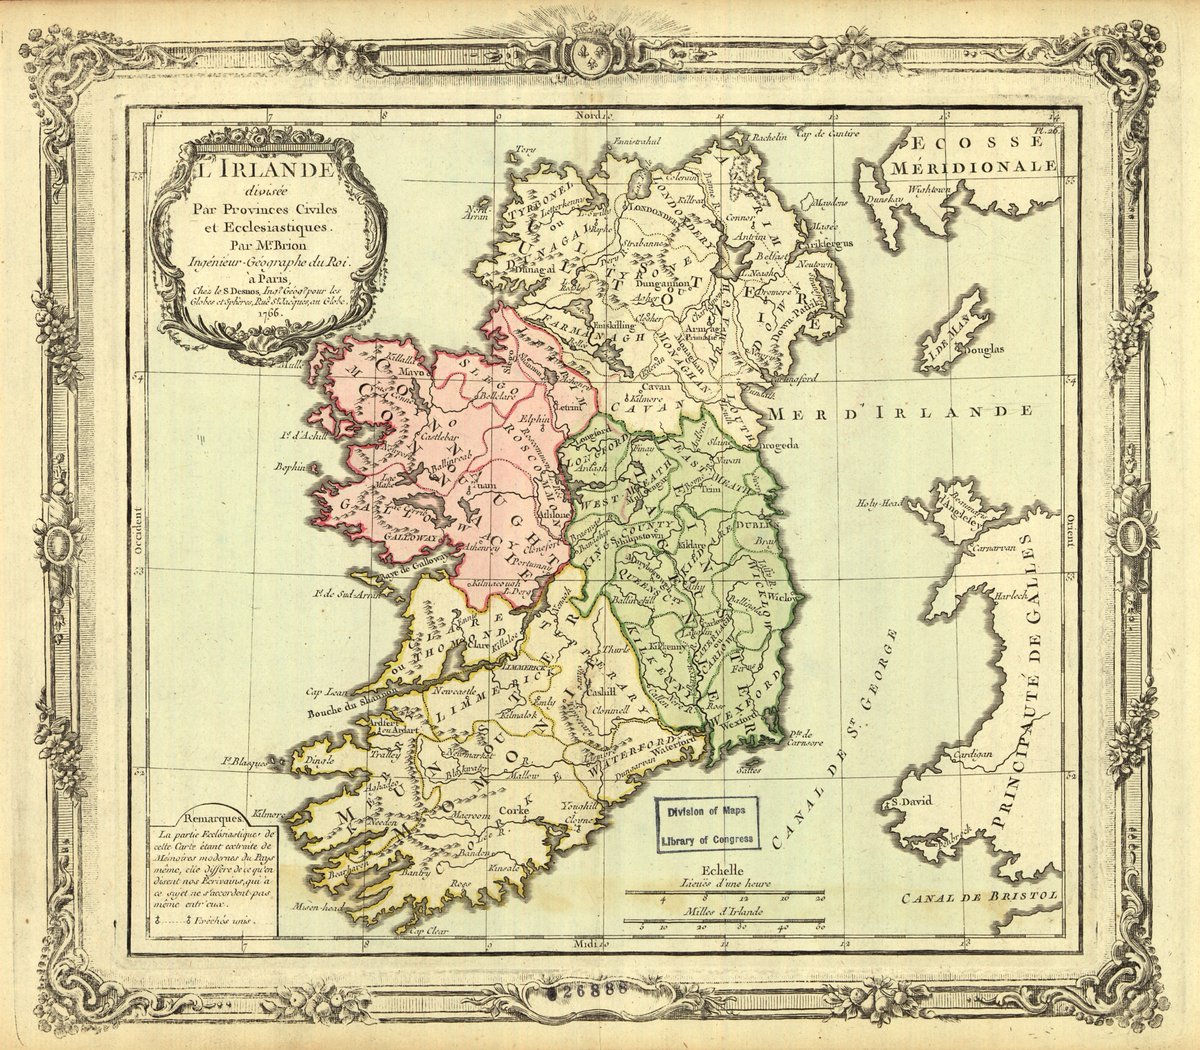 In today's #MondayMappery we look at a beautifully hand coloured map of Ireland by Louis Brion de la Tour from 1766 when he was just 23. It maps the provinces of Ireland and the main ecclesiastical centres of each county.
Courtesy of the US Library of Congress.
View in hi-res…